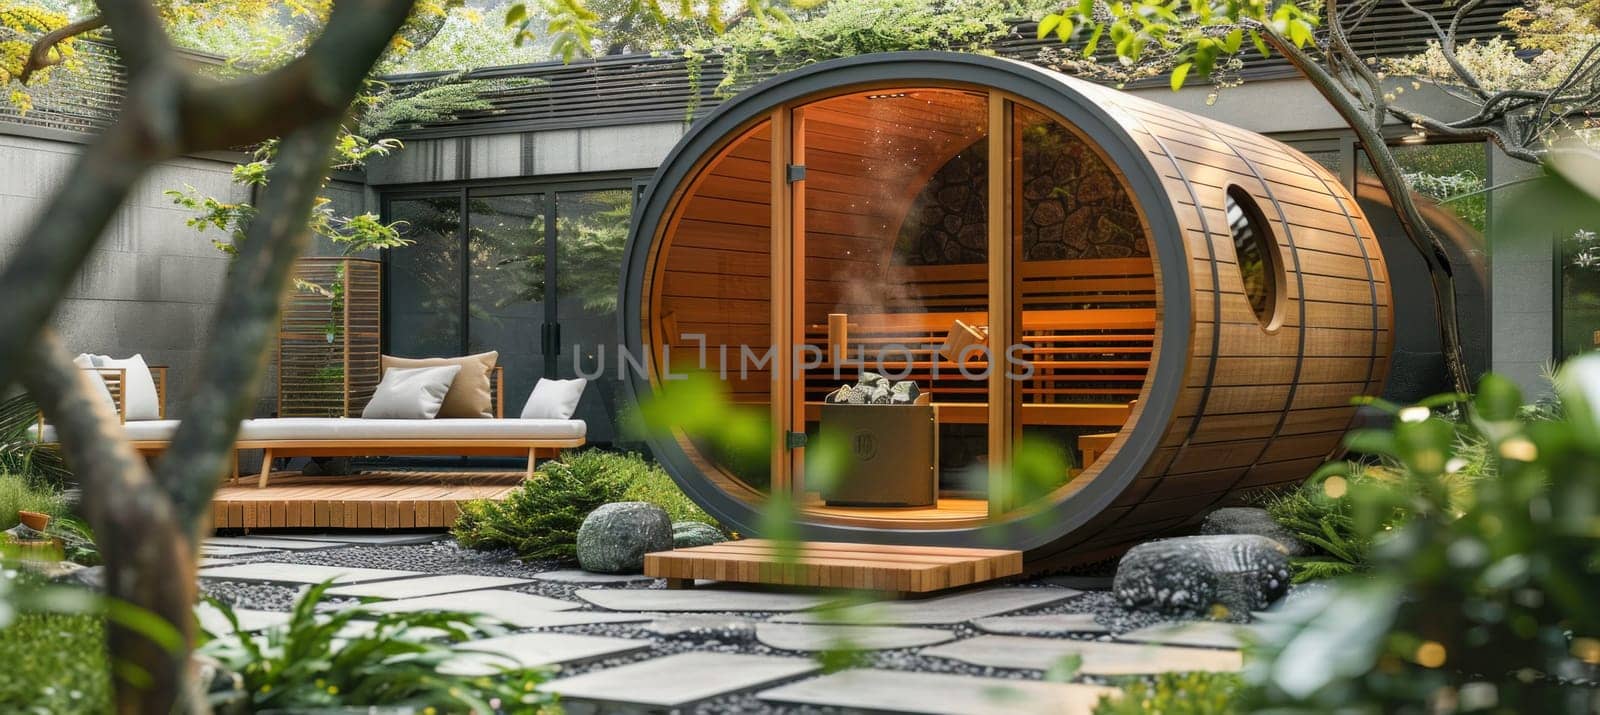 In a picturesque lush garden, a wooden barrel sauna stands as the centerpiece, surrounded by the serenity of nature